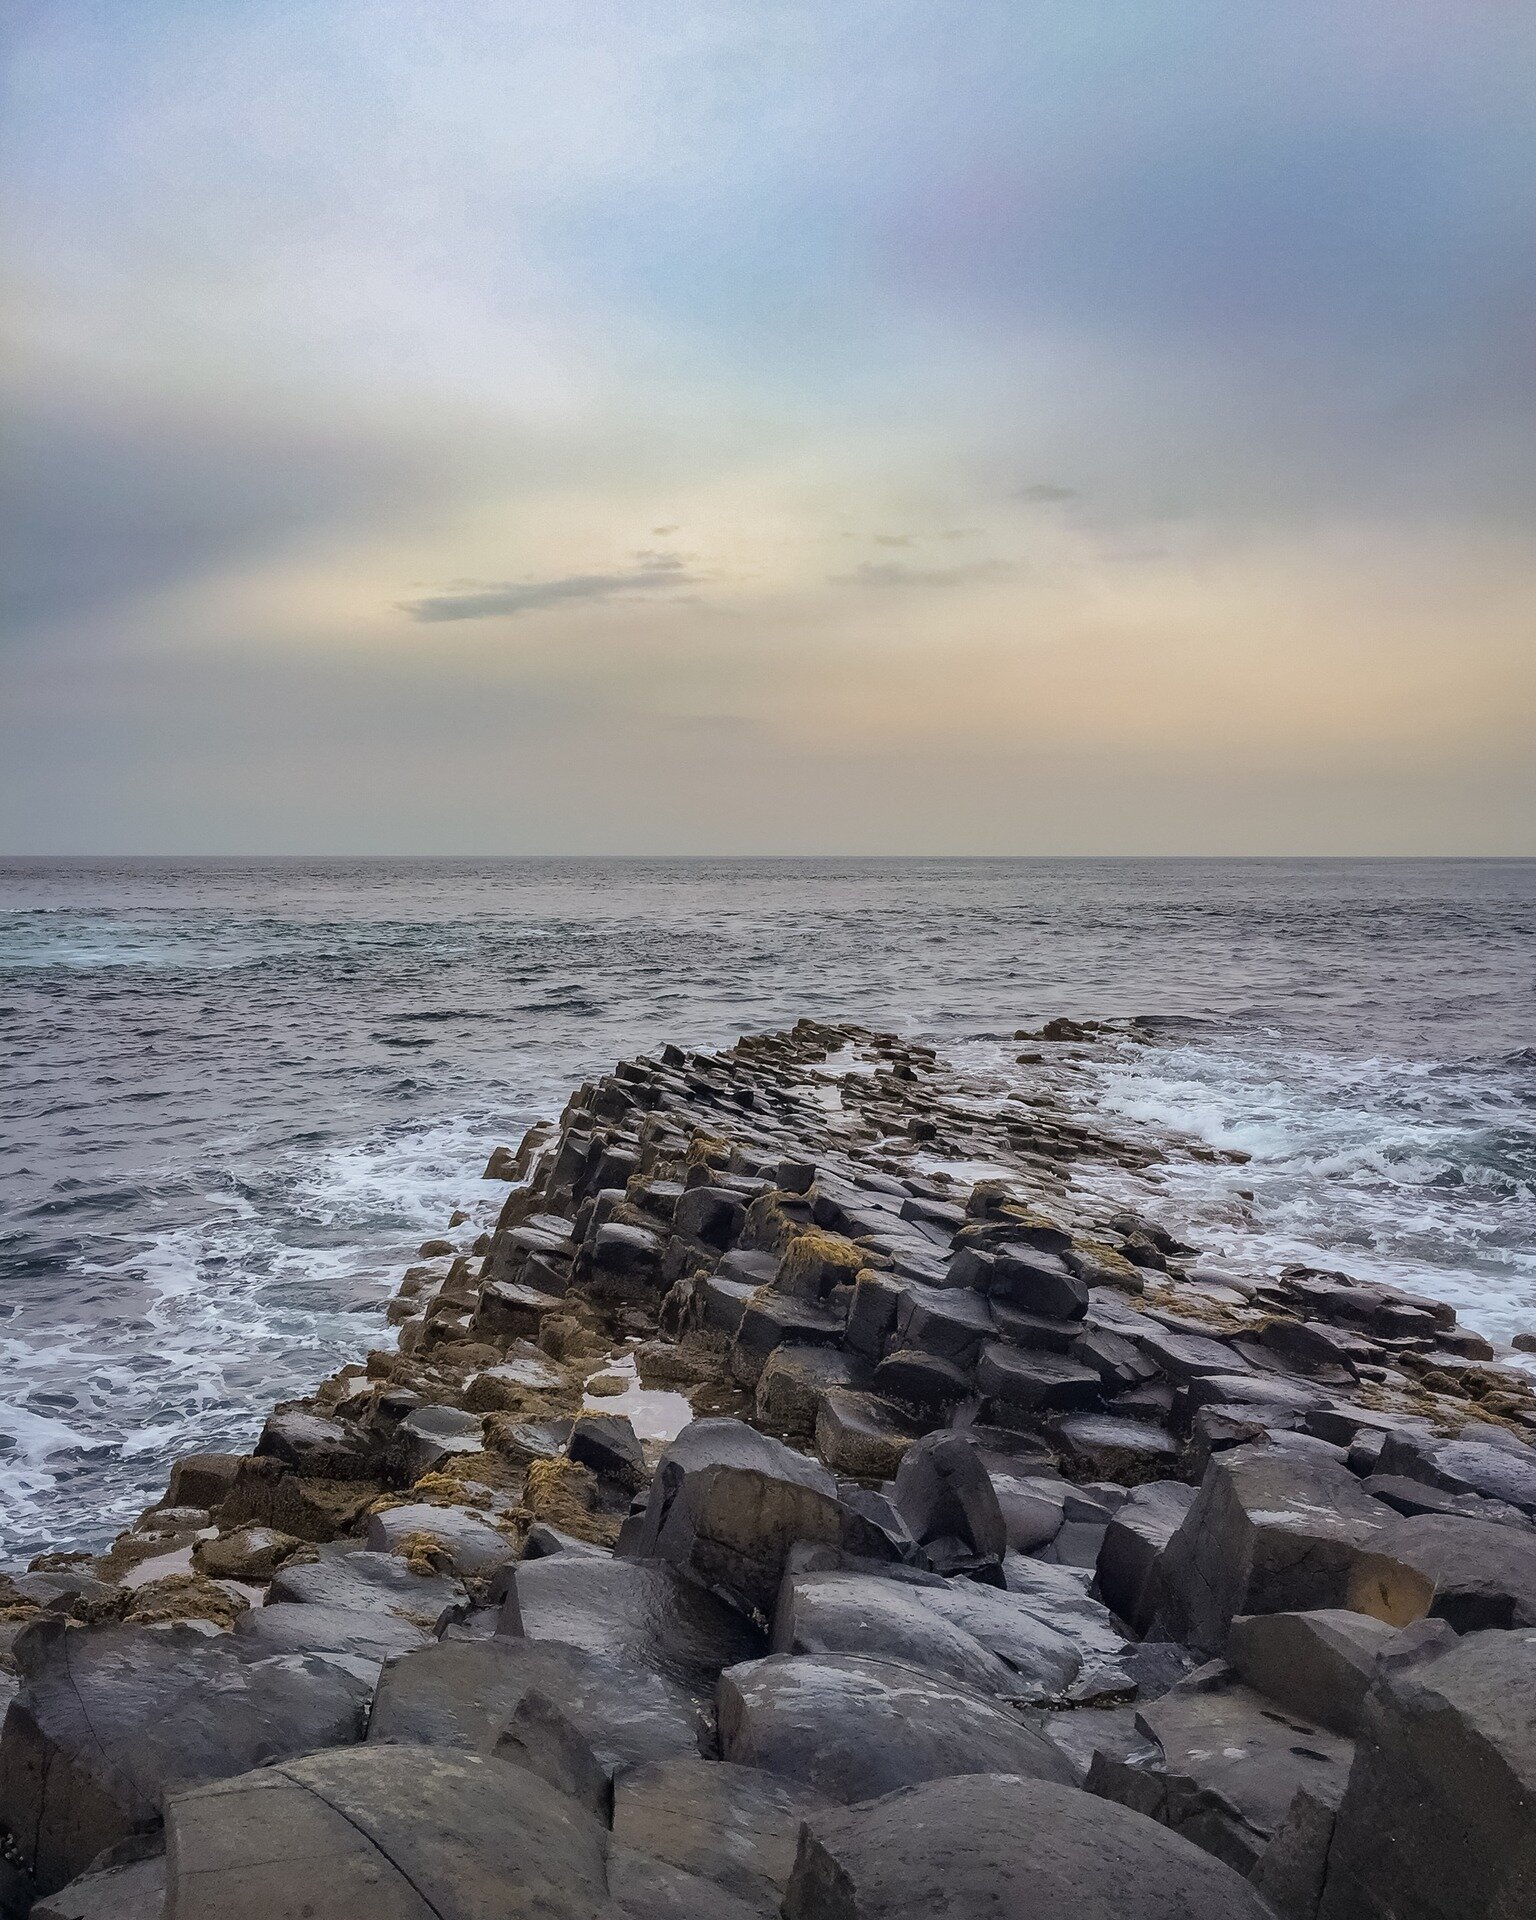 The Giants Causeway was somewhere I had always wanted to visit and see in person and a few years ago I got the opportunity to do just that. It's such an amazing place with beautiful views, so well worth a visit if you are in Northern Ireland. Where i